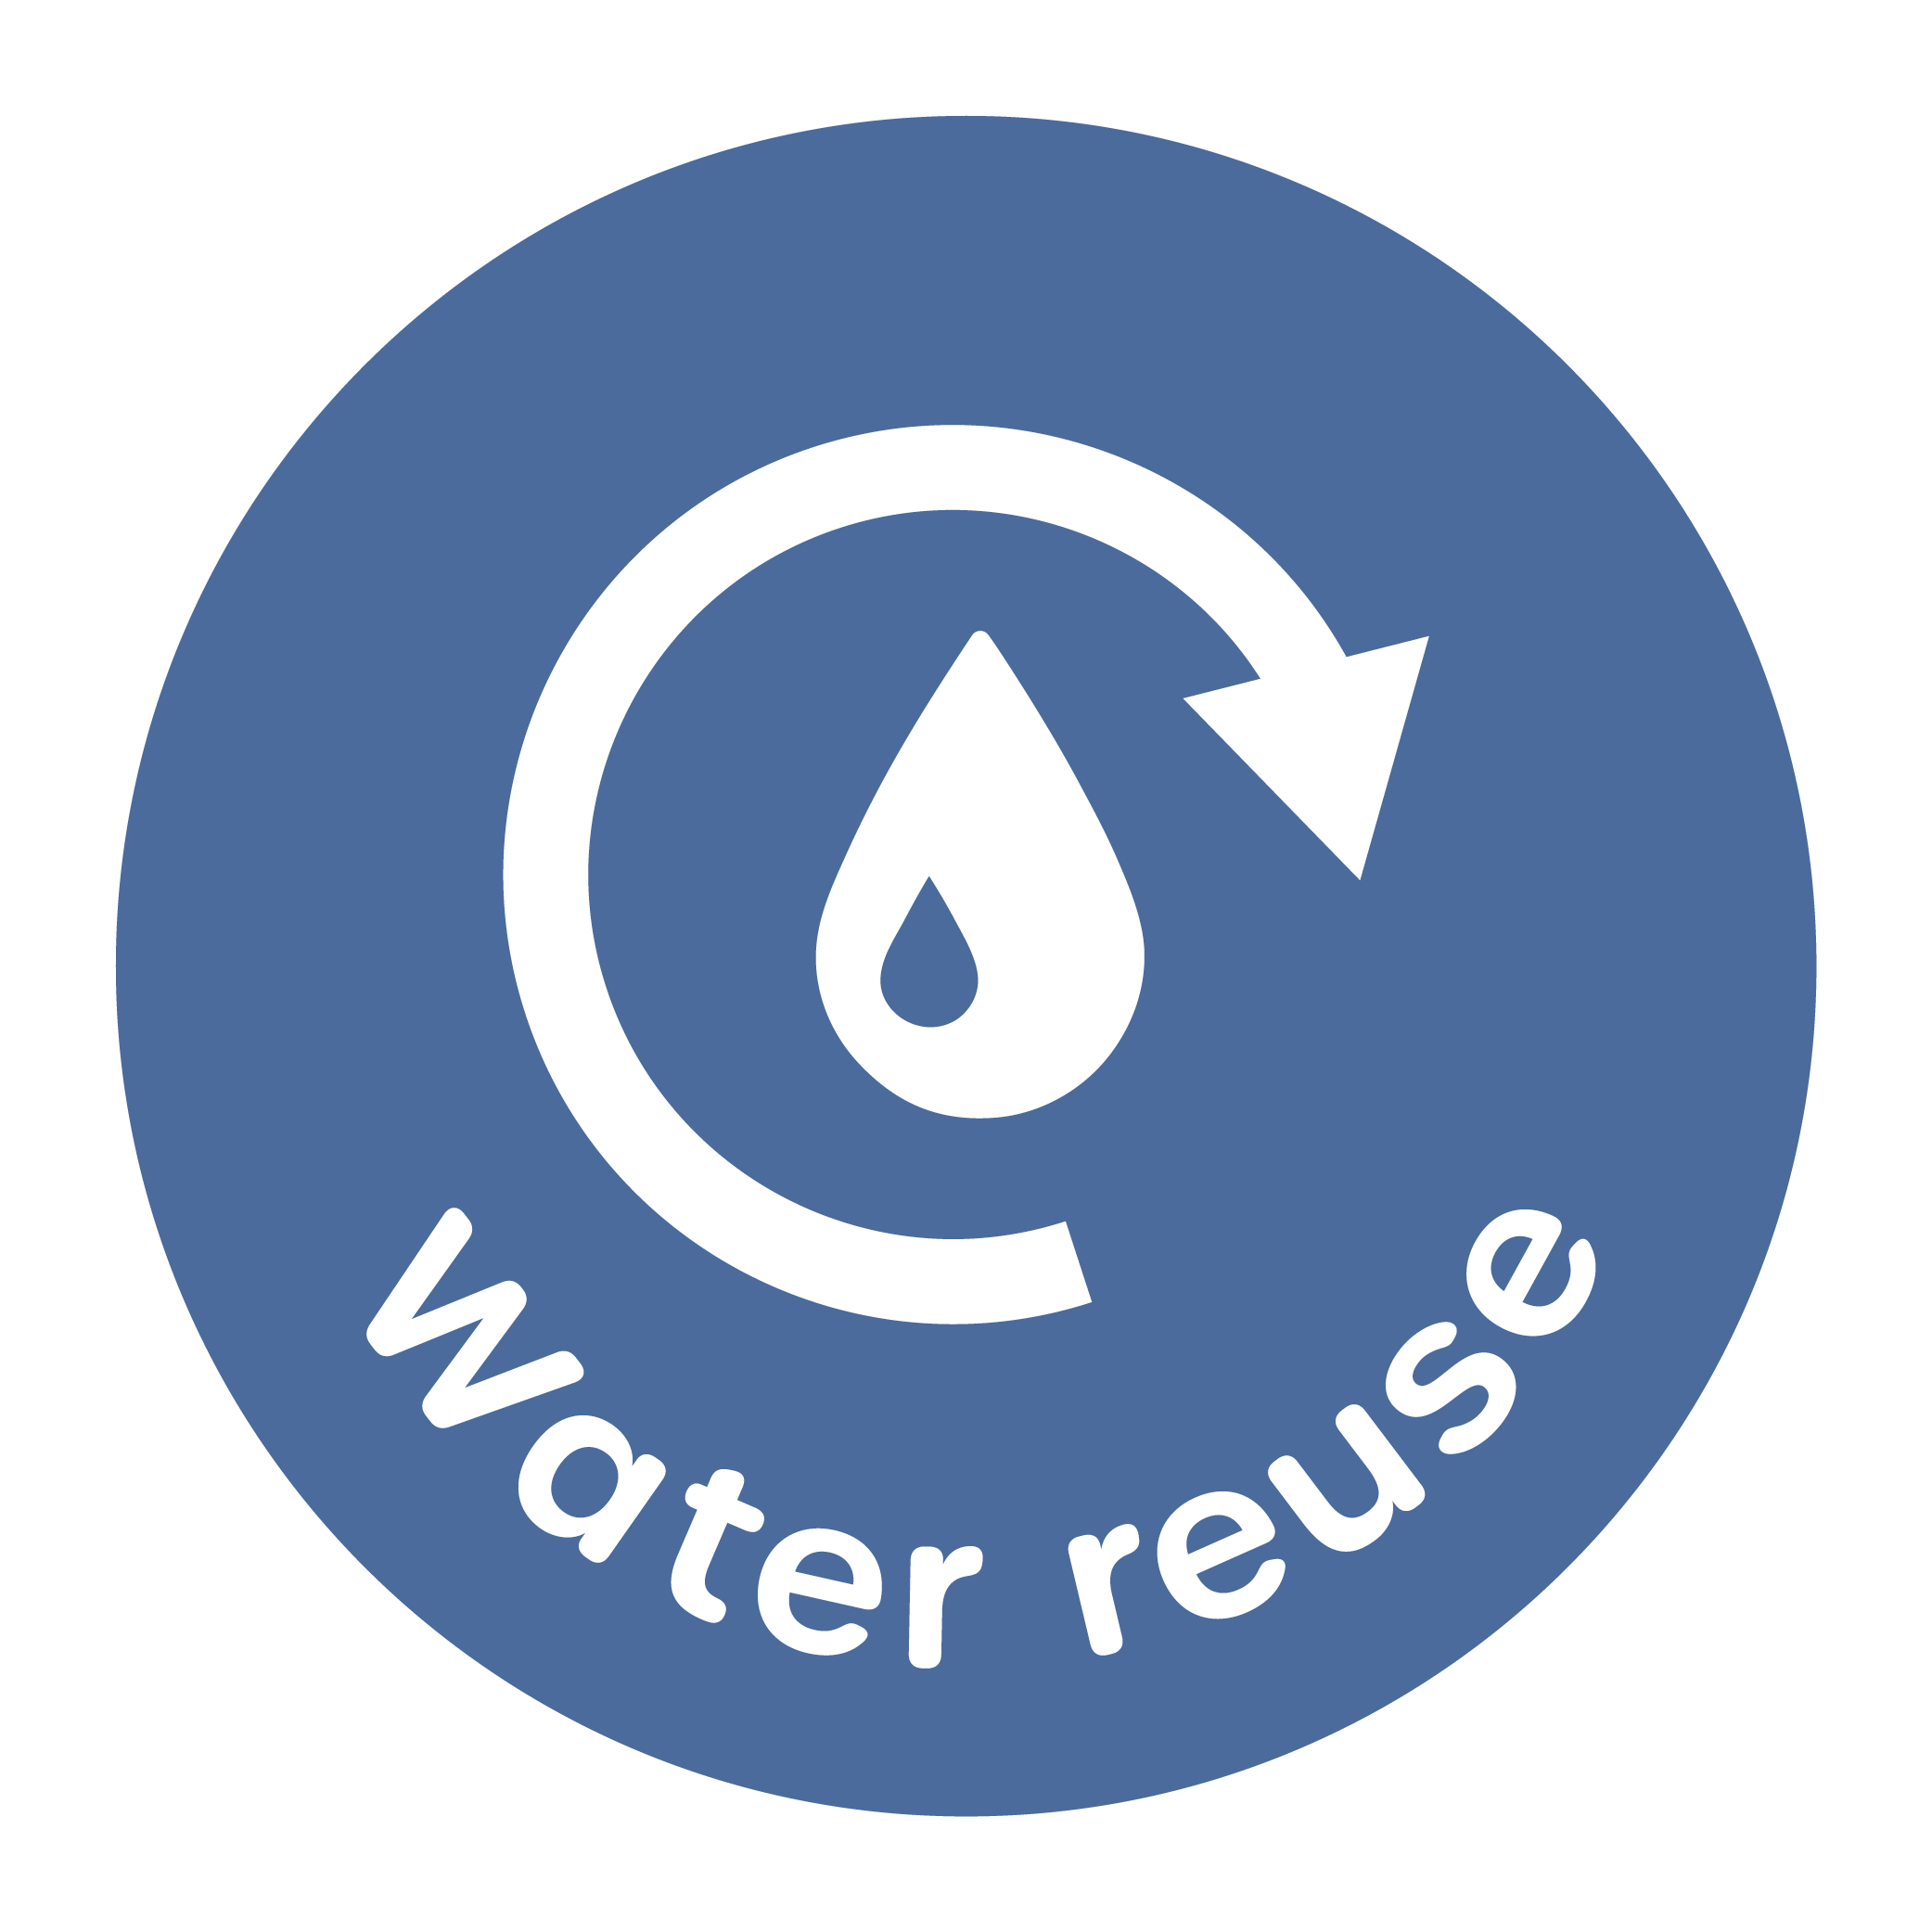 Water reuse is our main goal